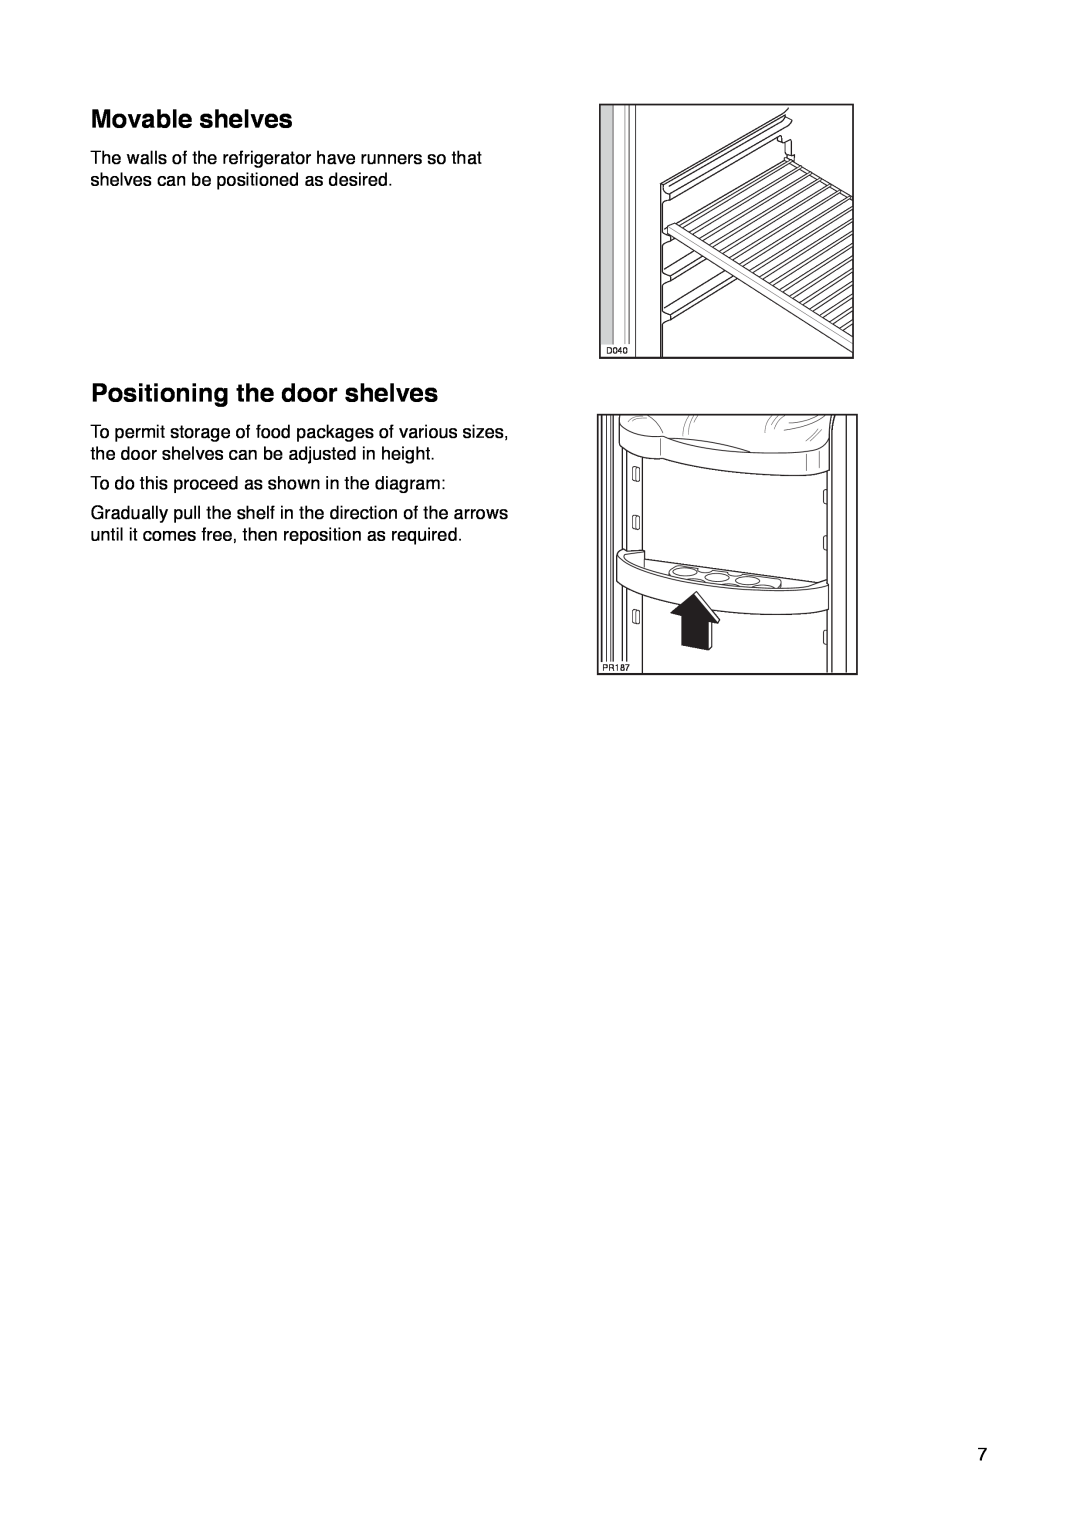 Tricity Bendix FD 792 installation instructions Movable shelves, Positioning the door shelves 